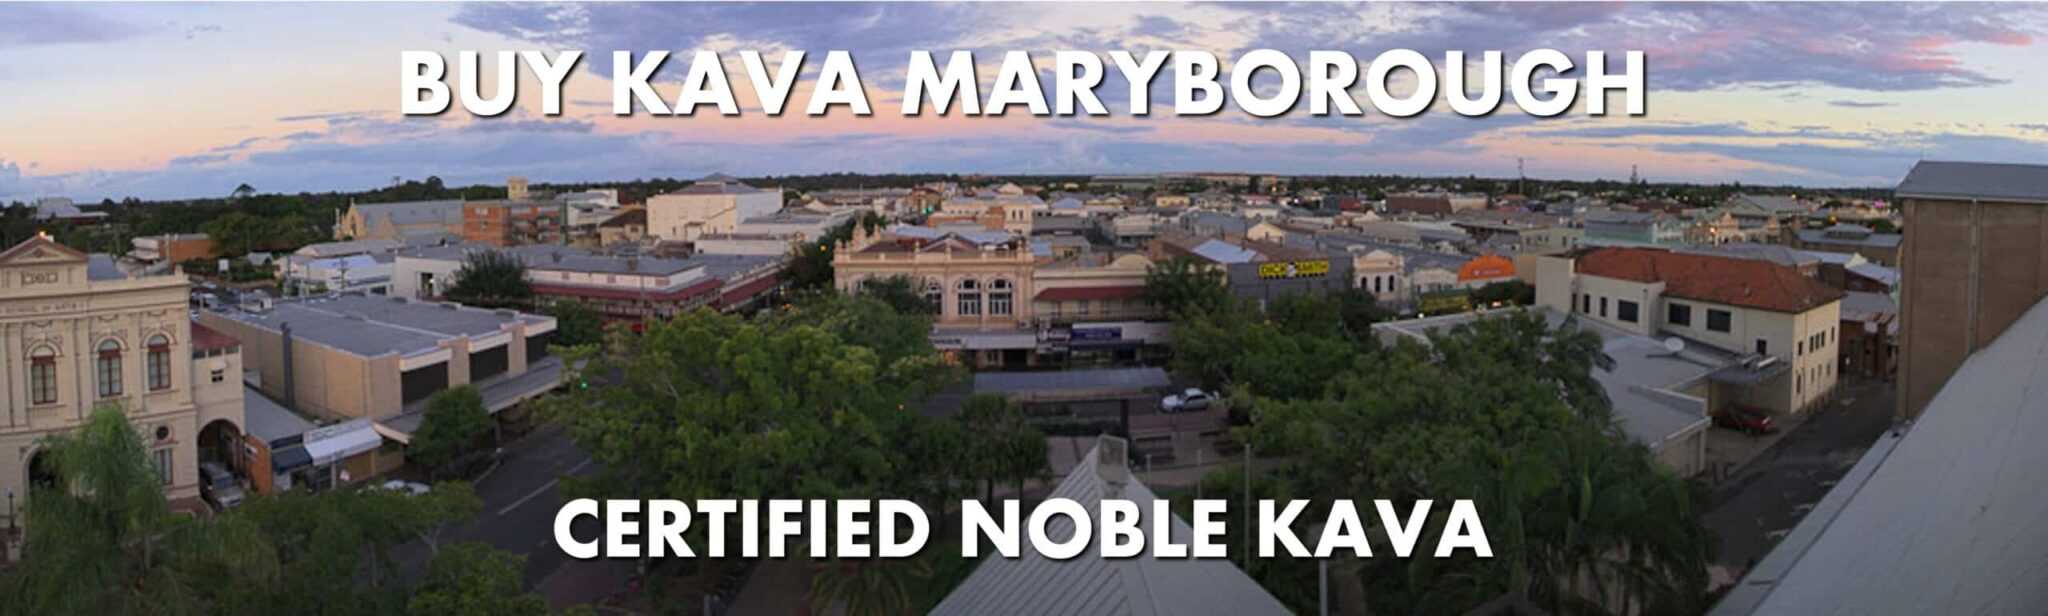 Aerial view of Maryborough with caption Buy Kava Maryborough Certified Noble Kava